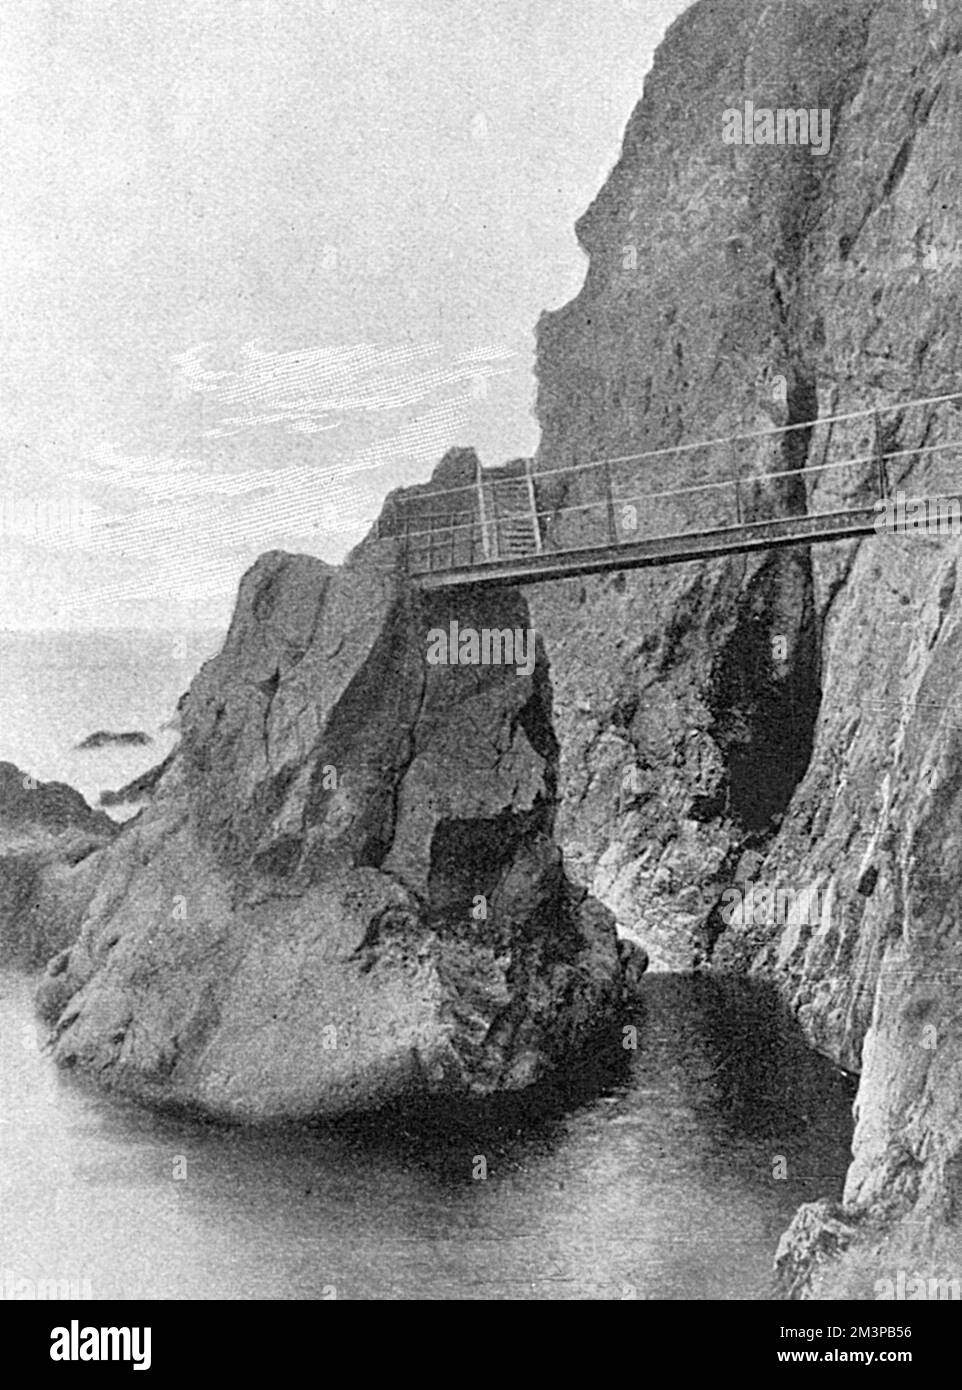 The Gobbins cliff path in Islandmagee, County Antrim, Northern Ireland : the entrance to the first cave of 'Seven Sisters' and the end of the pathway as of 1902 when the first section of the path opened. The scenic coastal path was built by engineer Berkeley Deane Wise.     Date: 1902 Stock Photo